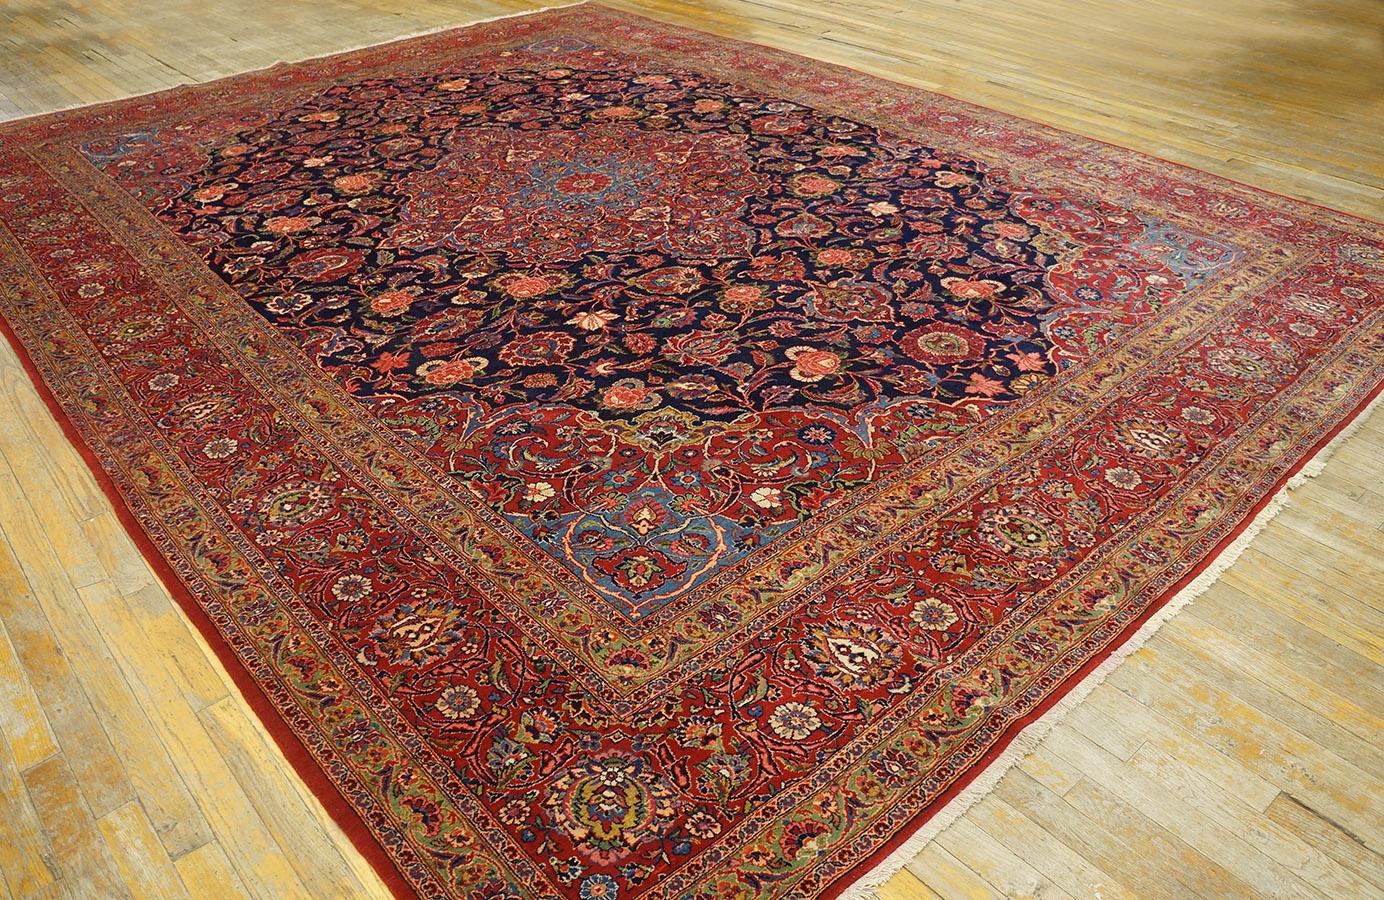 1930s Persian Kashan Carpet ( 10' 4'' x 14' - 315 x 425 cm ) In Good Condition For Sale In New York, NY